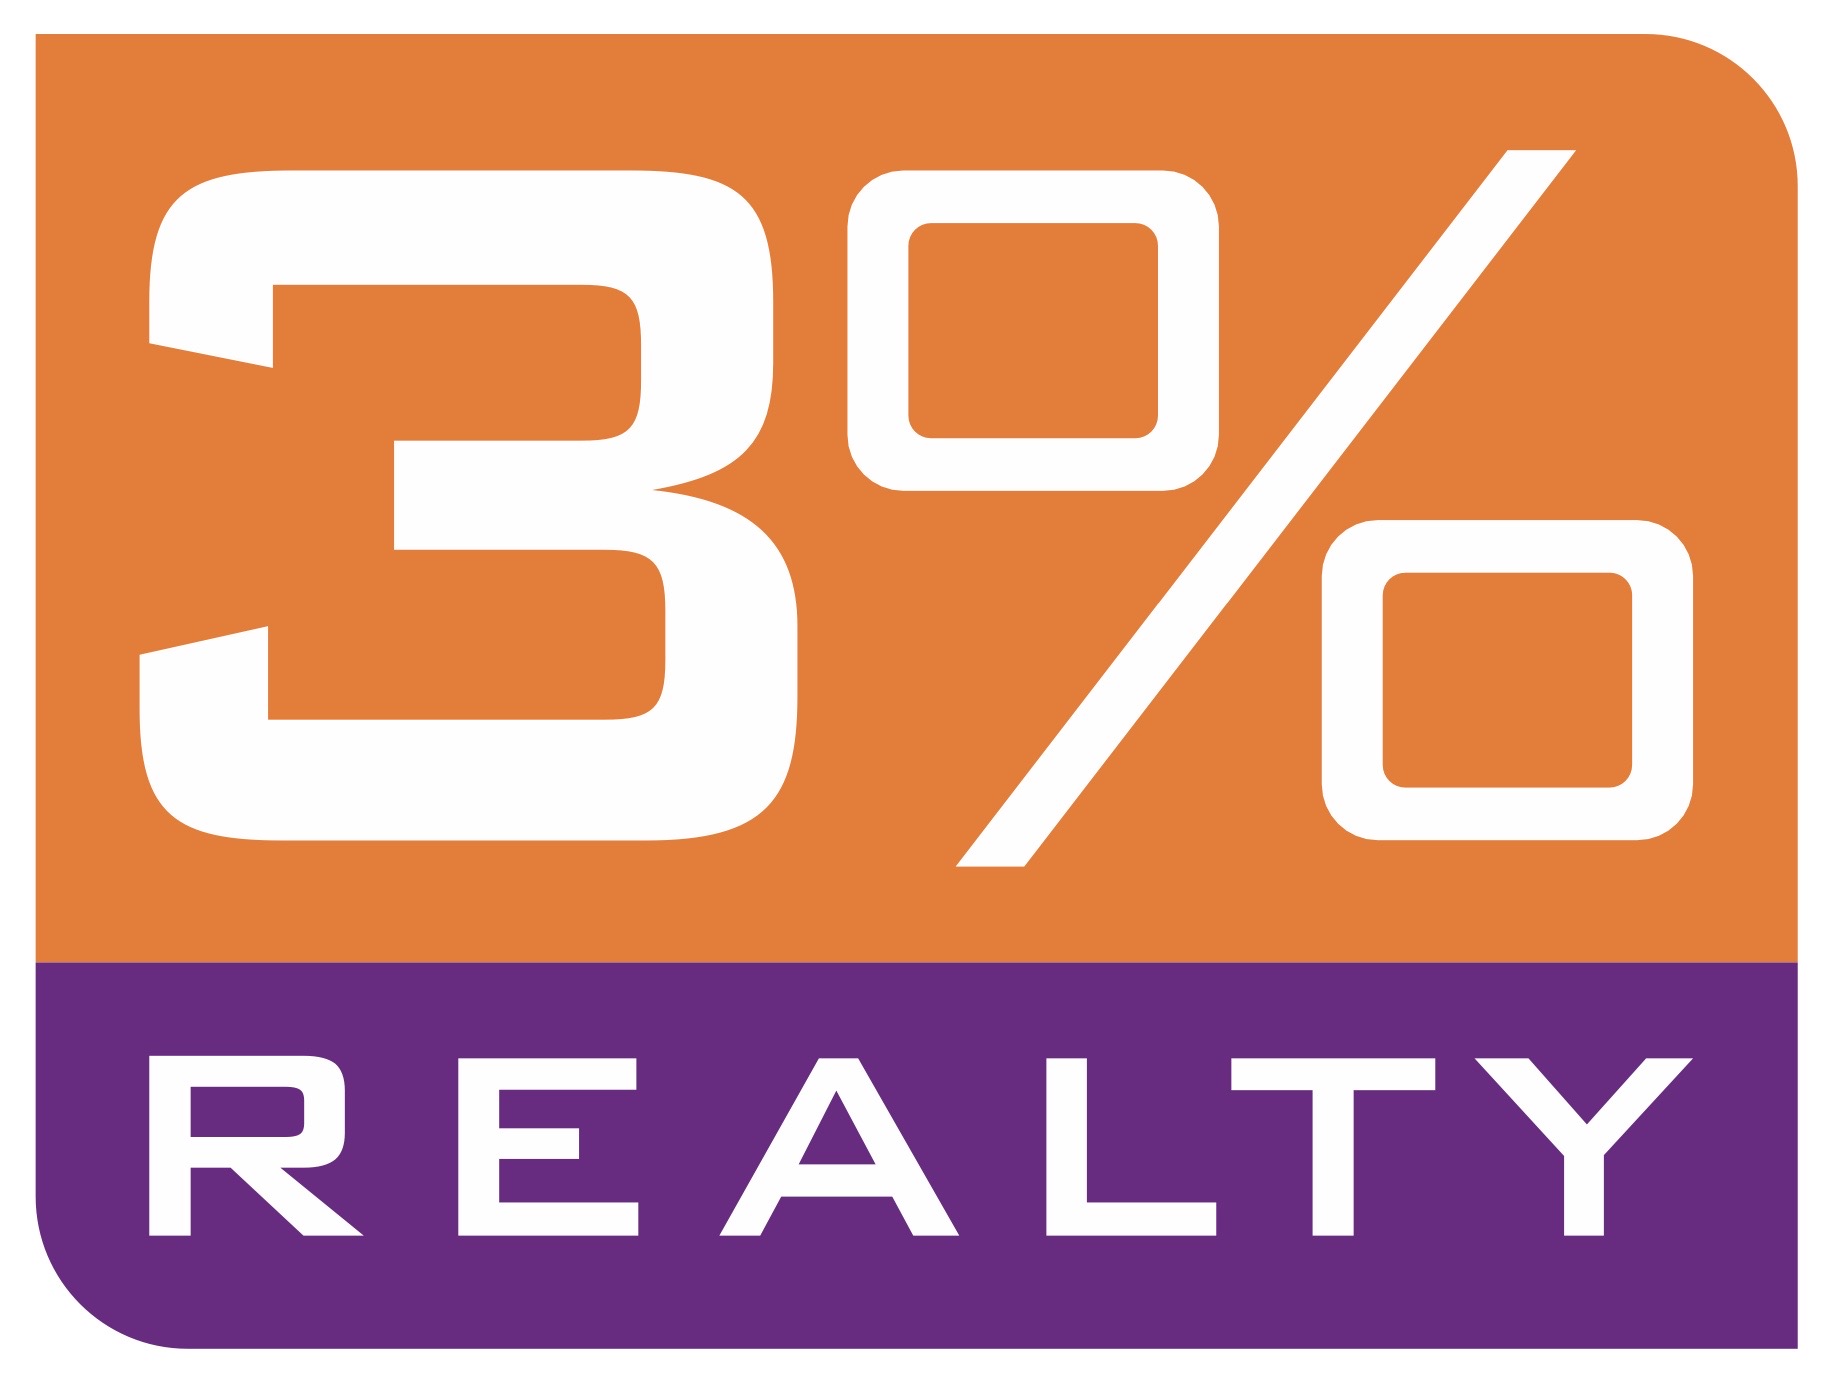 Canadian-based Company, 3% Realty Brings Full-Service Realty at a Fraction of the Cost in the US Market